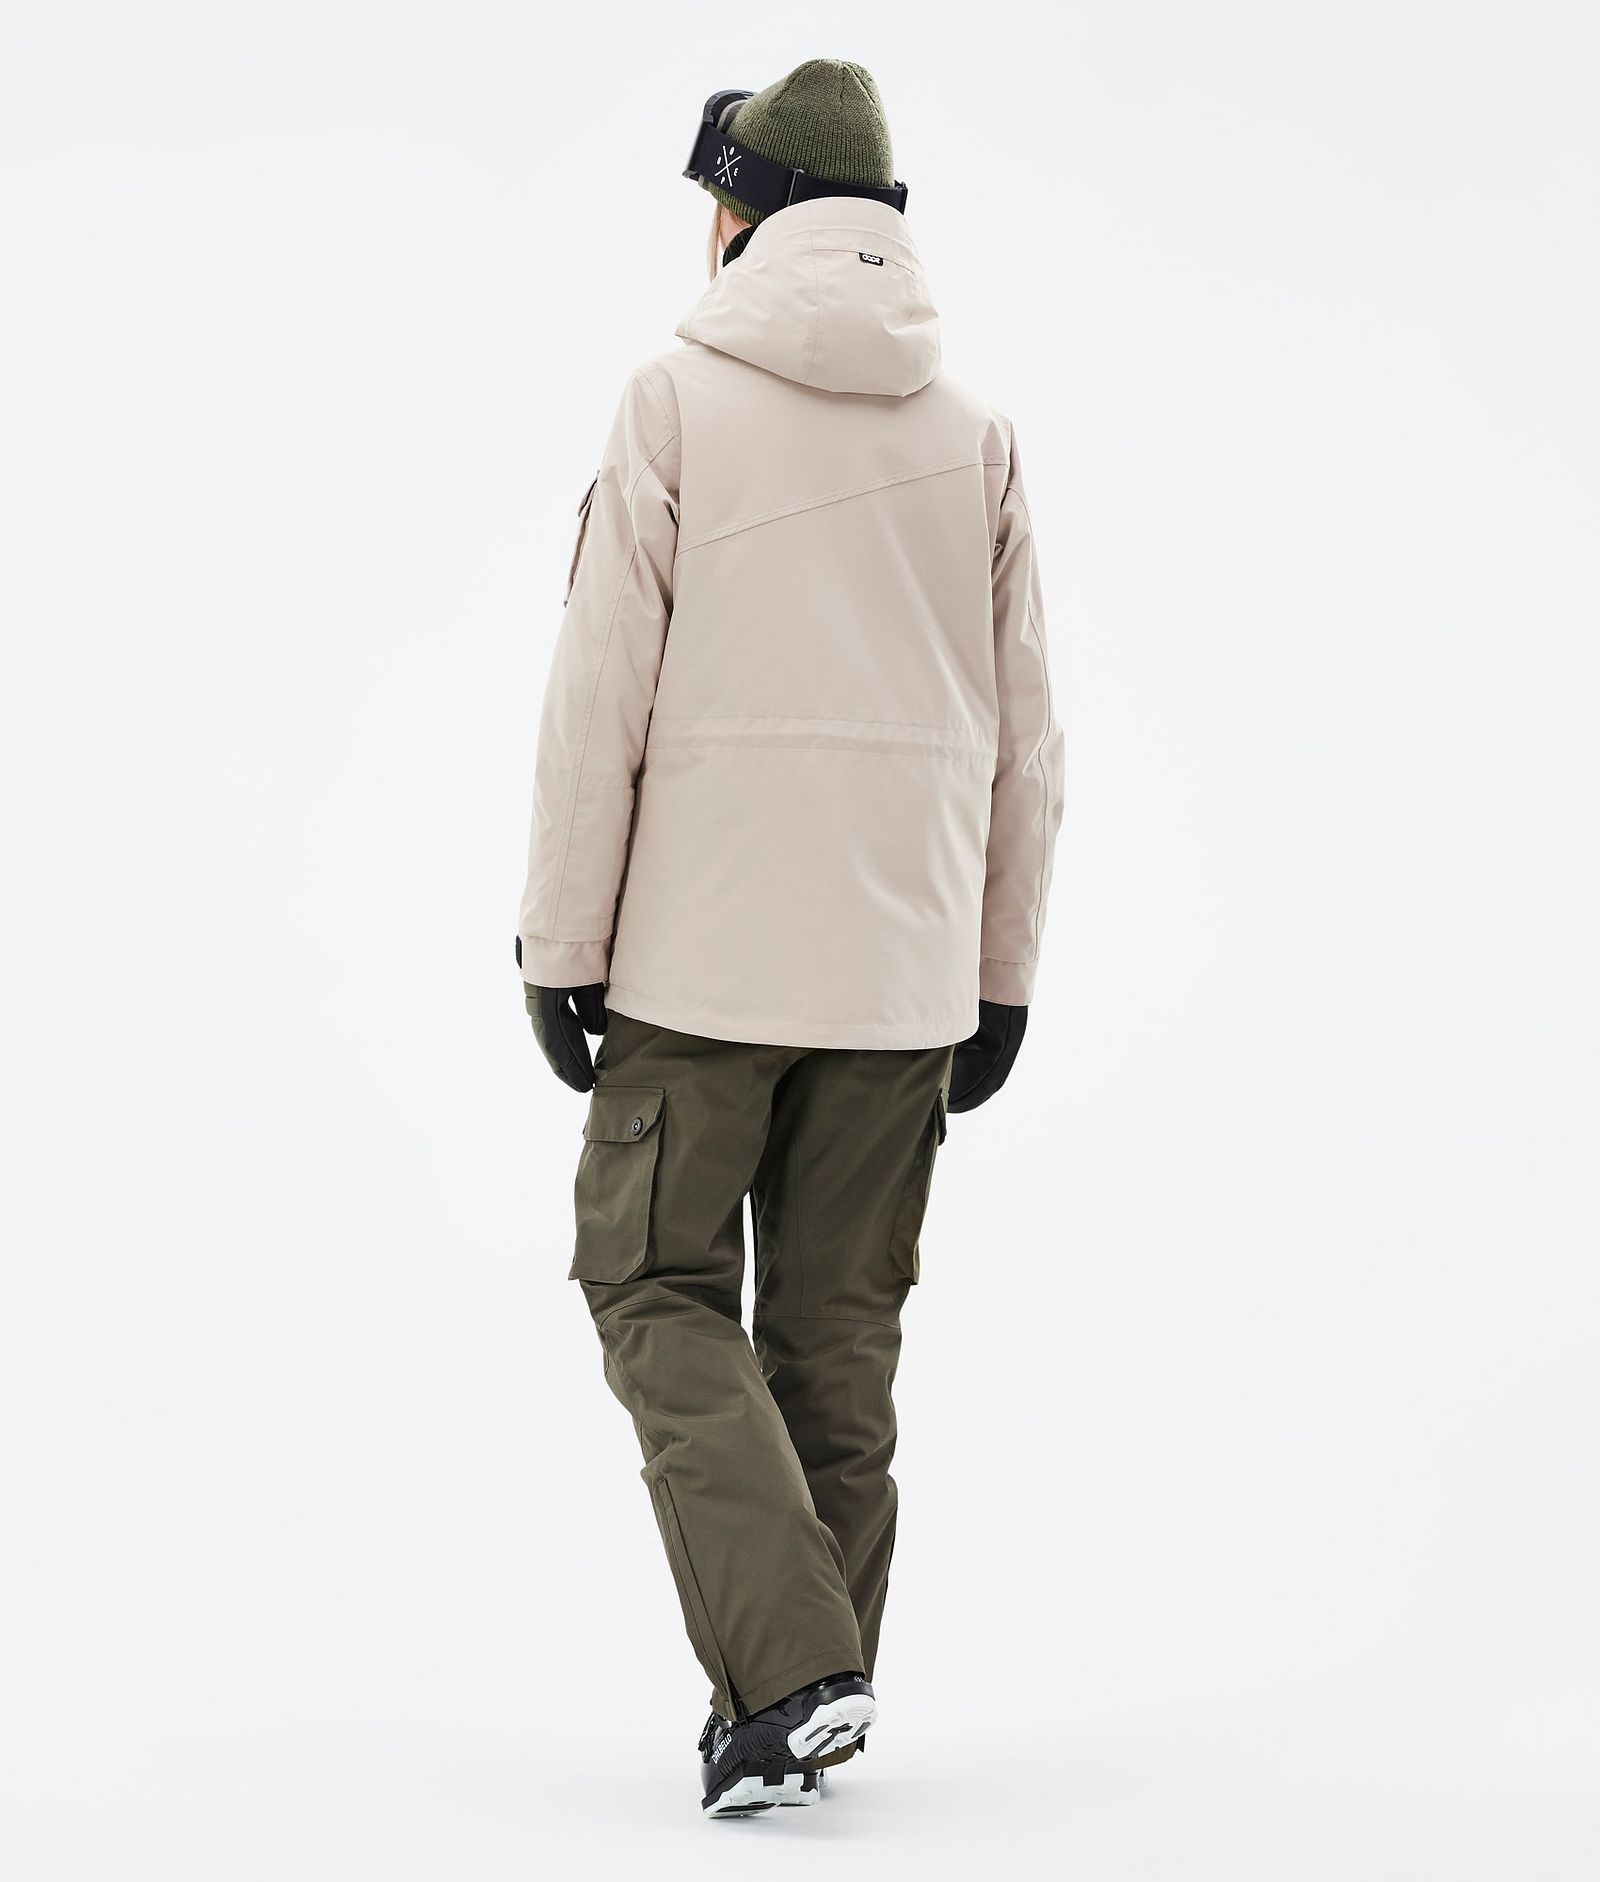 Dope Adept W Ski Outfit Women Sand/Olive Green